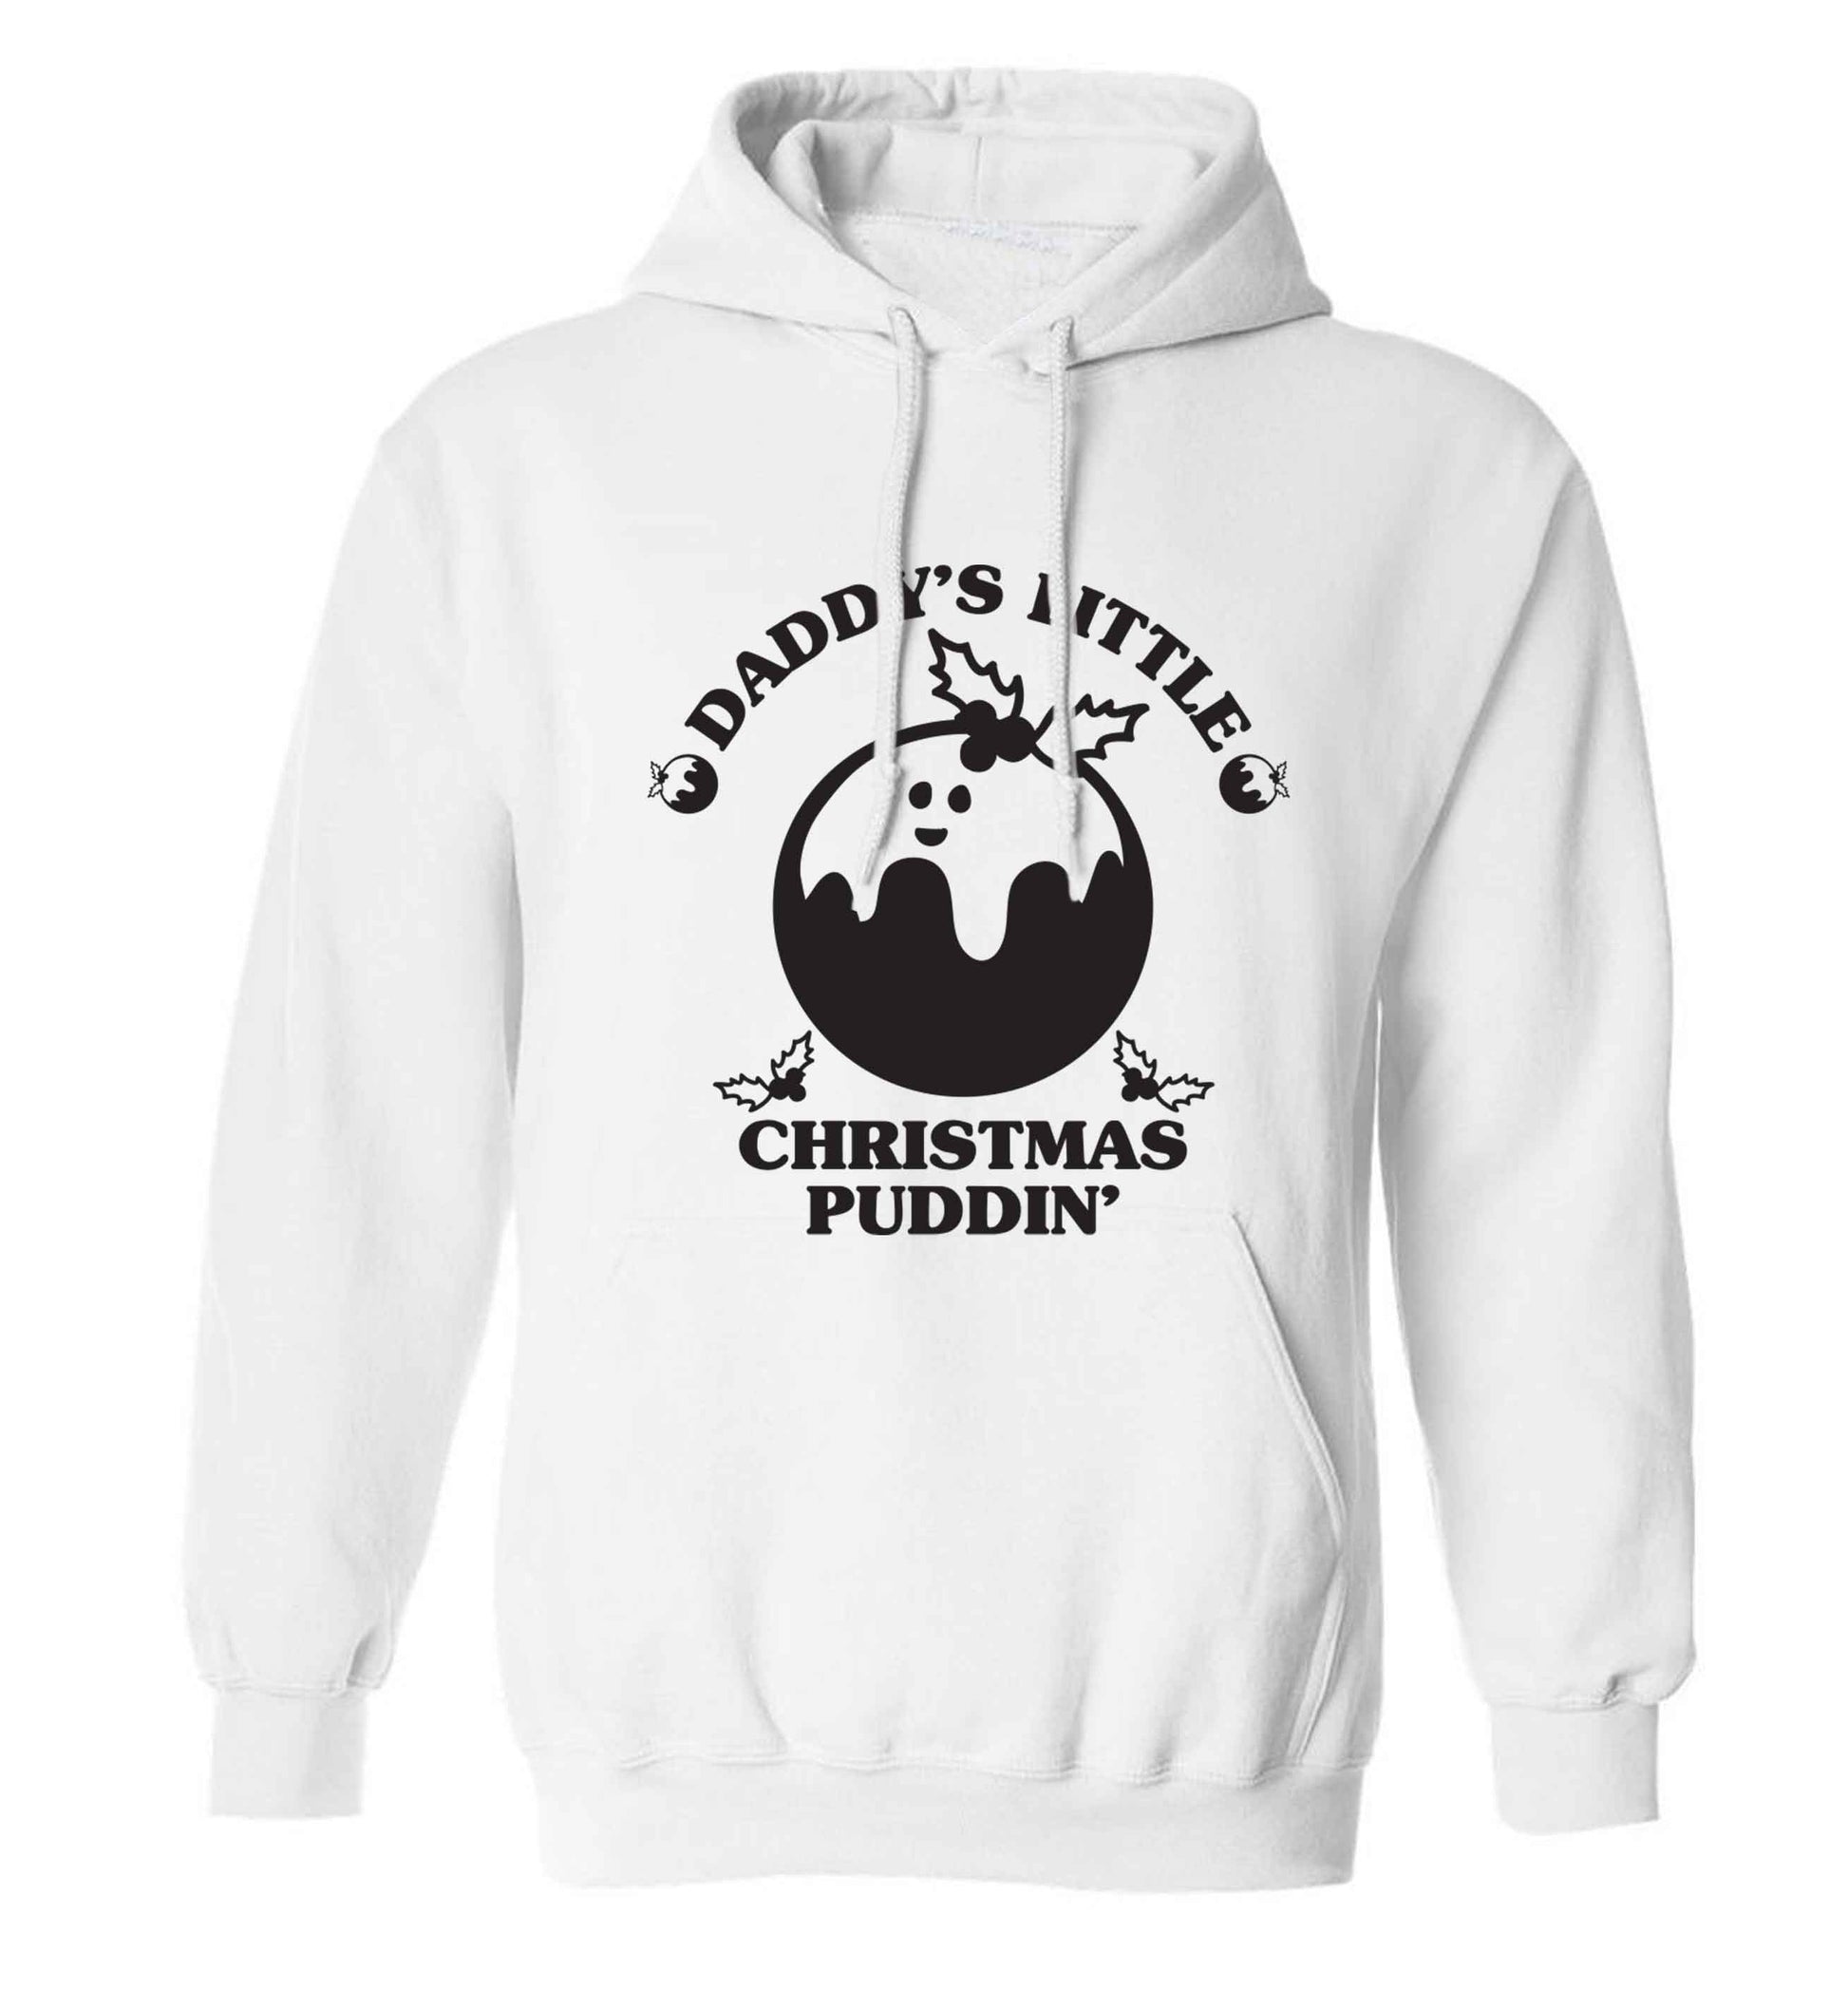 Daddy's little Christmas puddin' adults unisex white hoodie 2XL